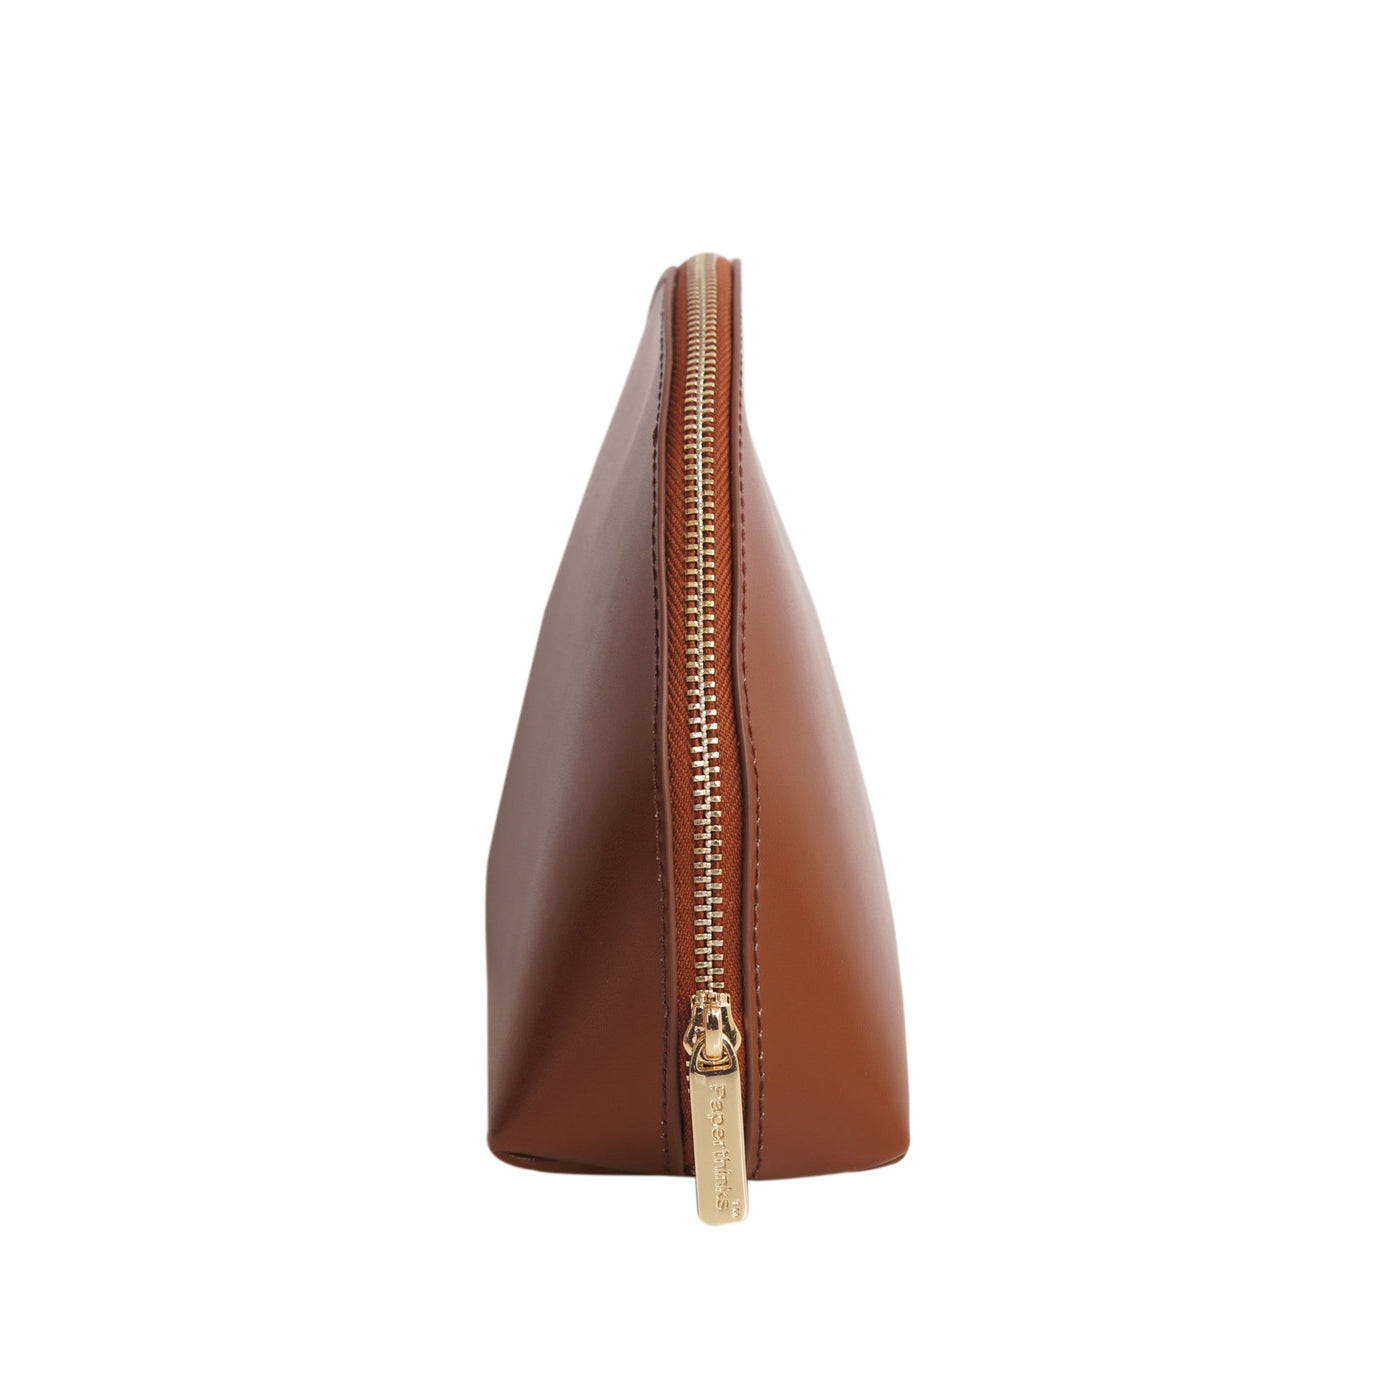 Paperthinks Reccycled Leather Cosmetics Pouch - Tan - Paperthinks.us